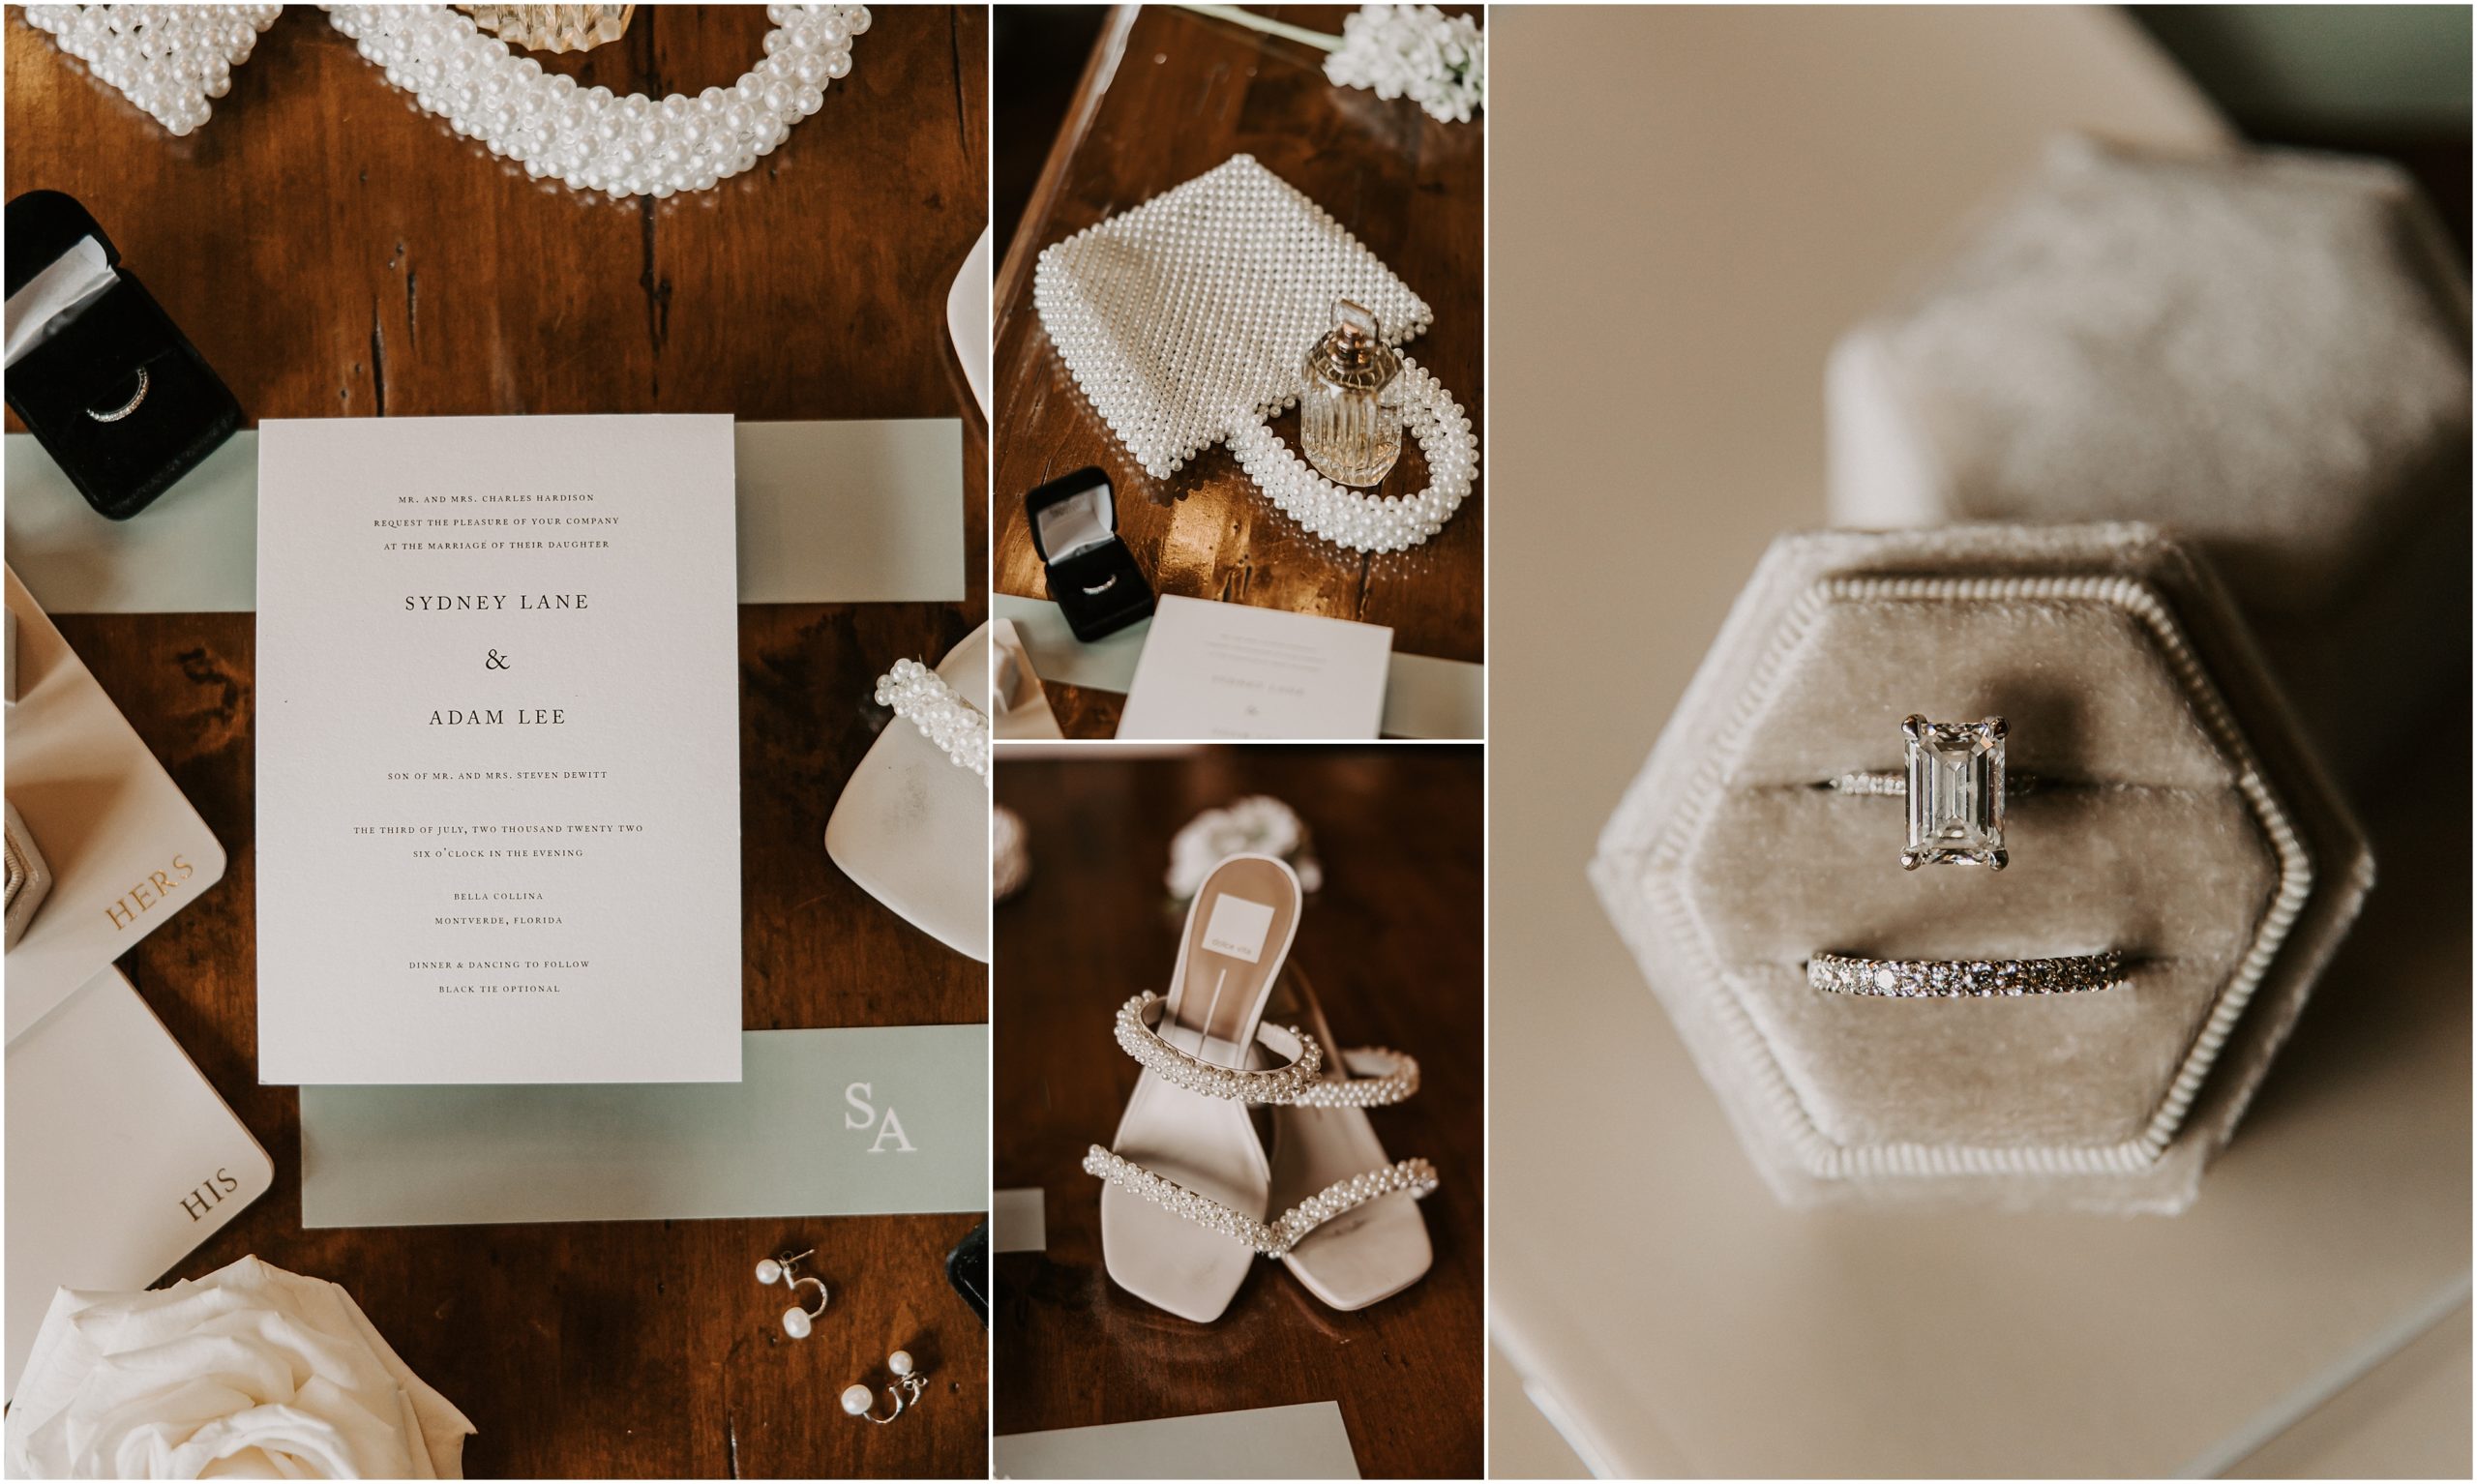 Sage, white and black was the elegant and timeless wedding color palette. The vibe they going for was elegant, romantic and minimalistic. 